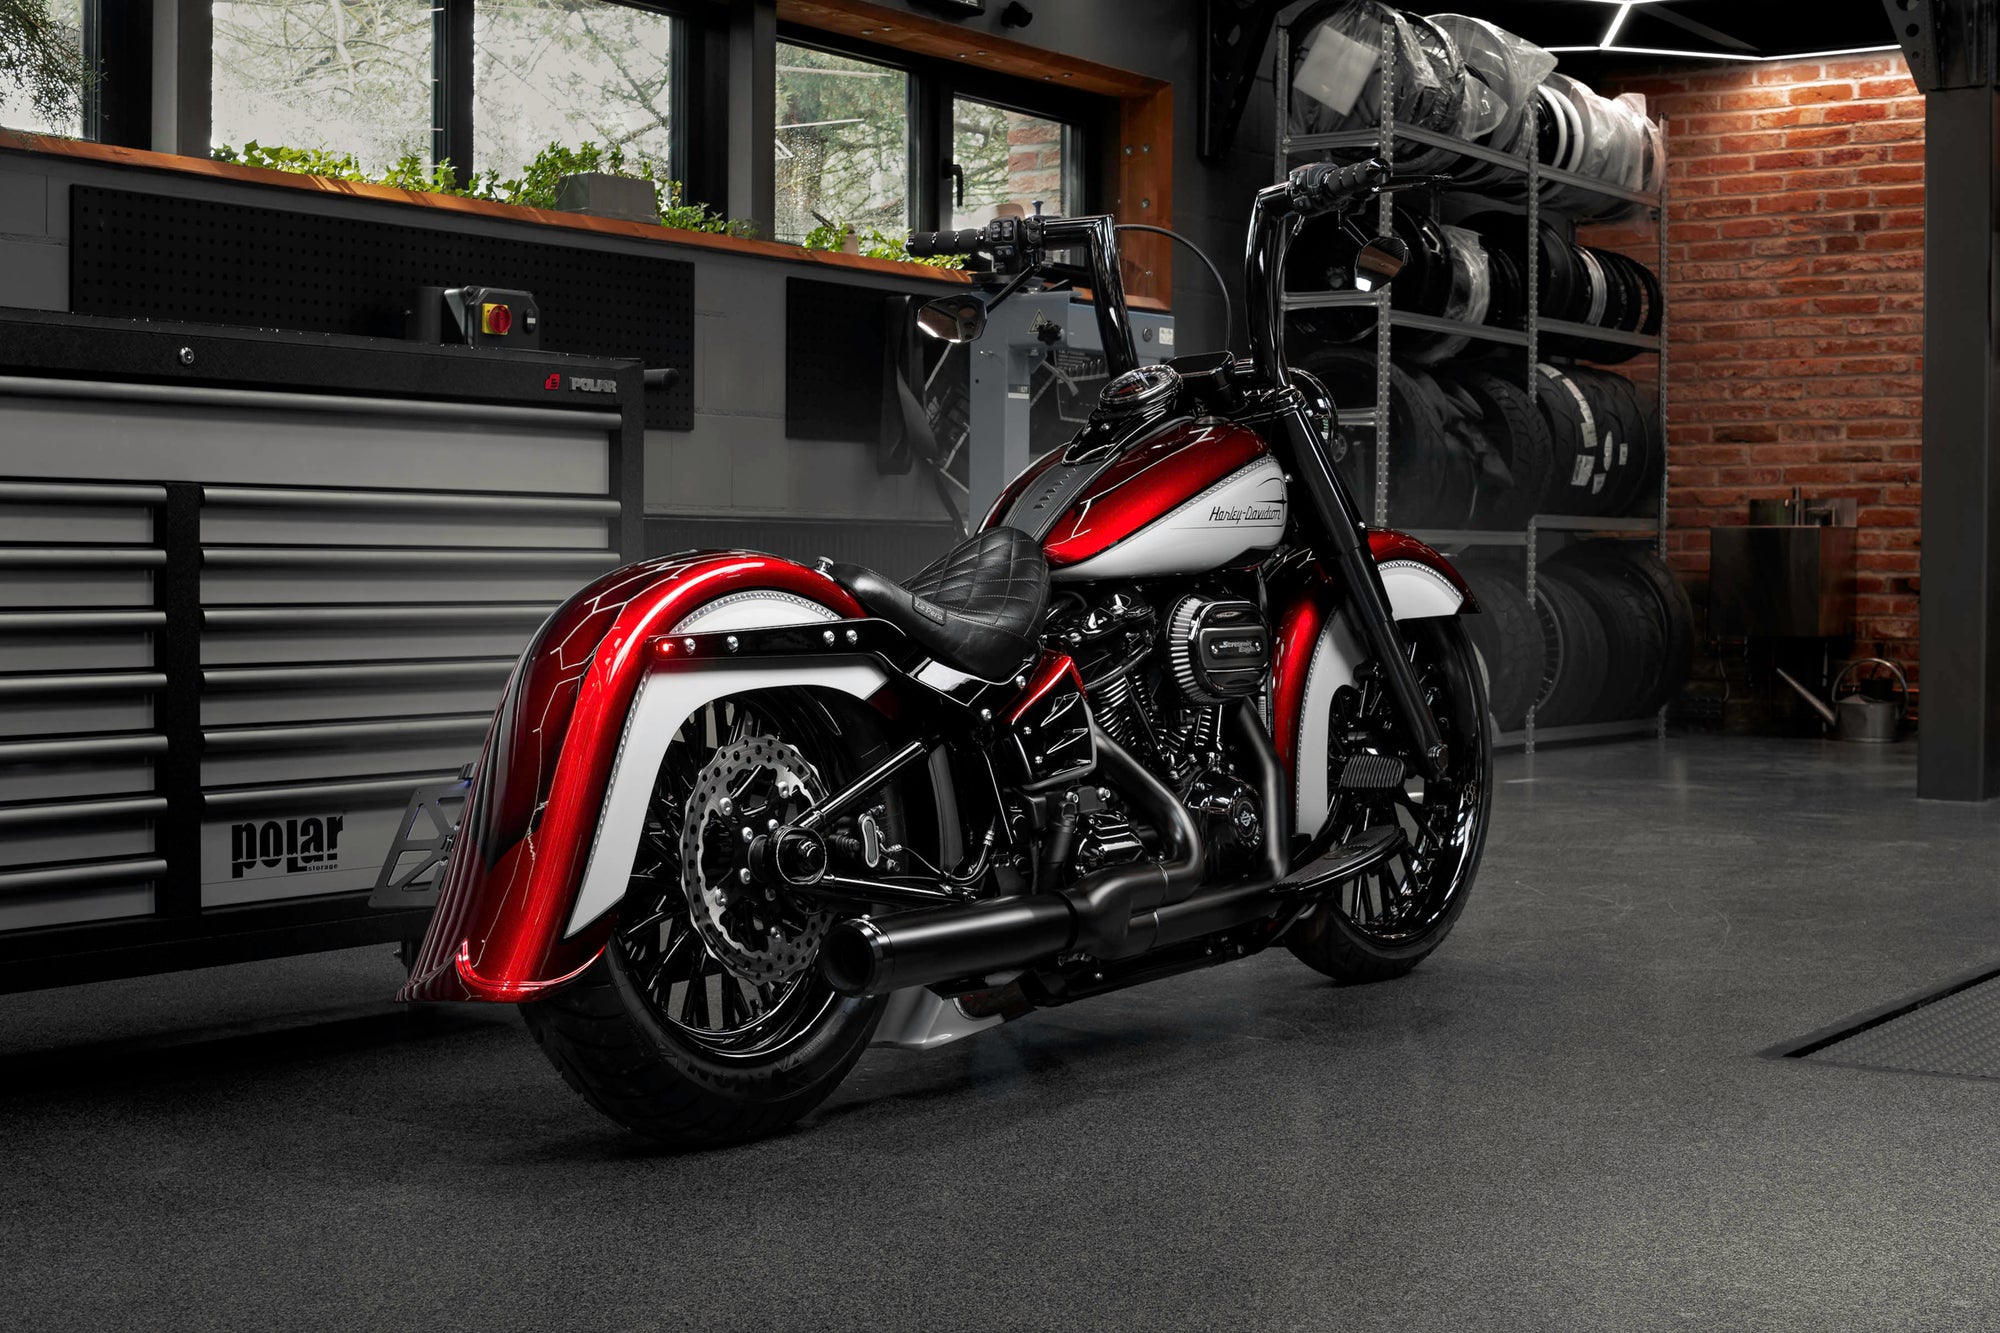 Harley Davidson motorcycle with Killer Custom parts from the side in a modern bike shop